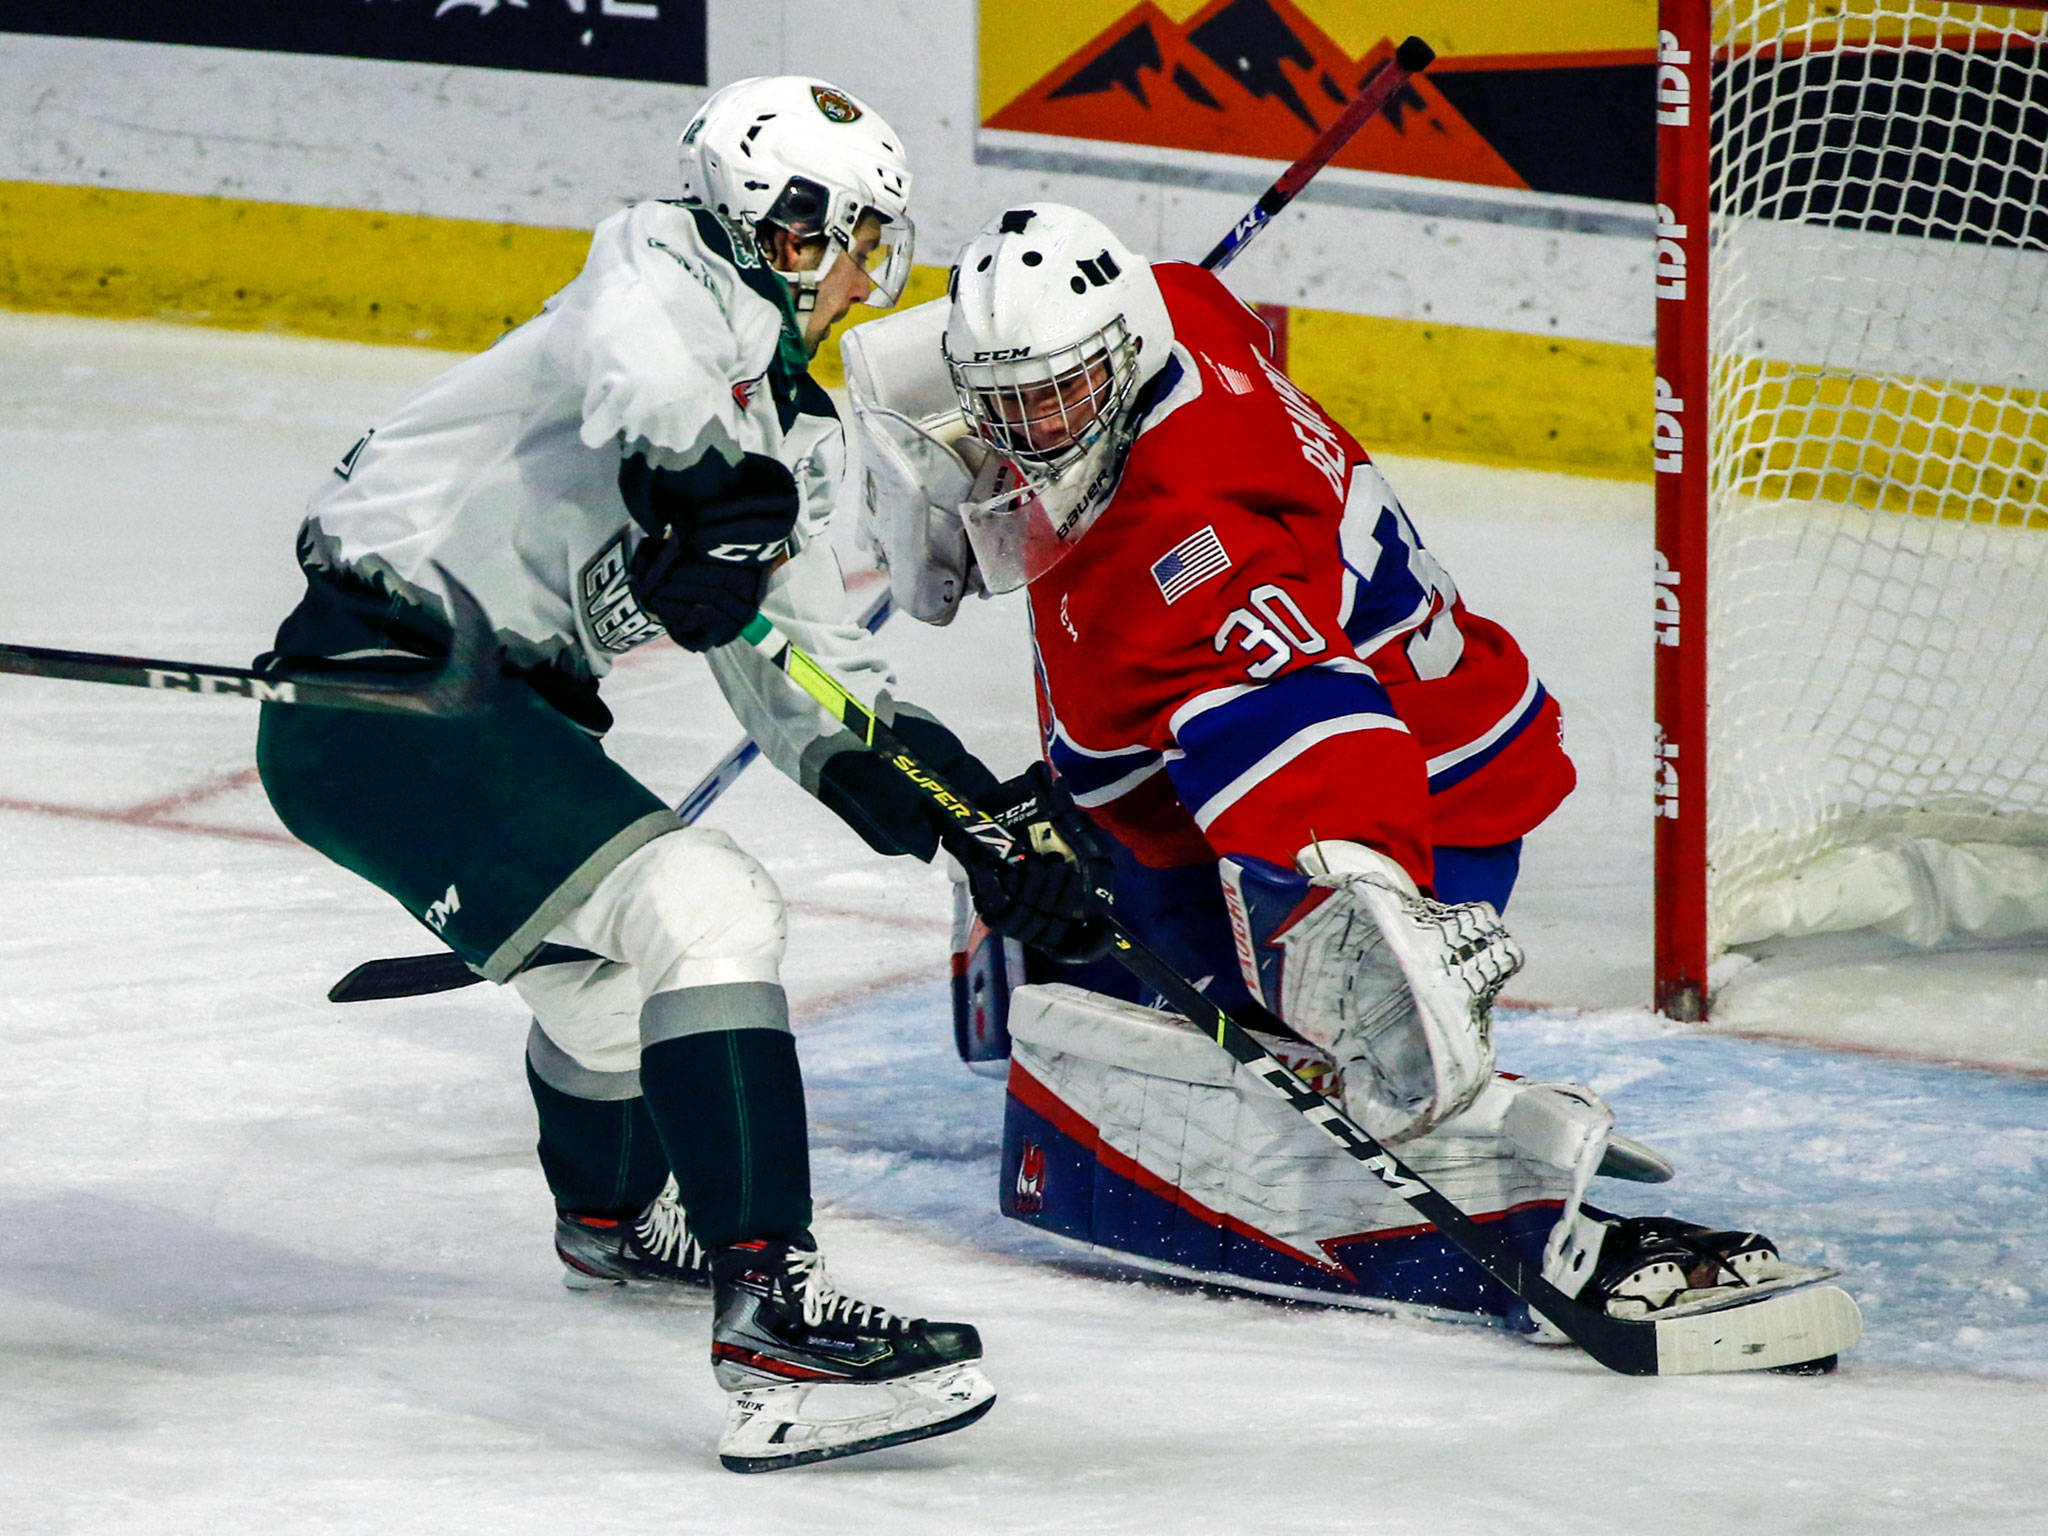 The Silvertips’ Cole Fonstad attempts a shot with as the Chiefs’ Mason Beaupit defends the net during a game on May 7, 2021, at Angel of the Winds Arena in Everett. (Kevin Clark / The Herald)